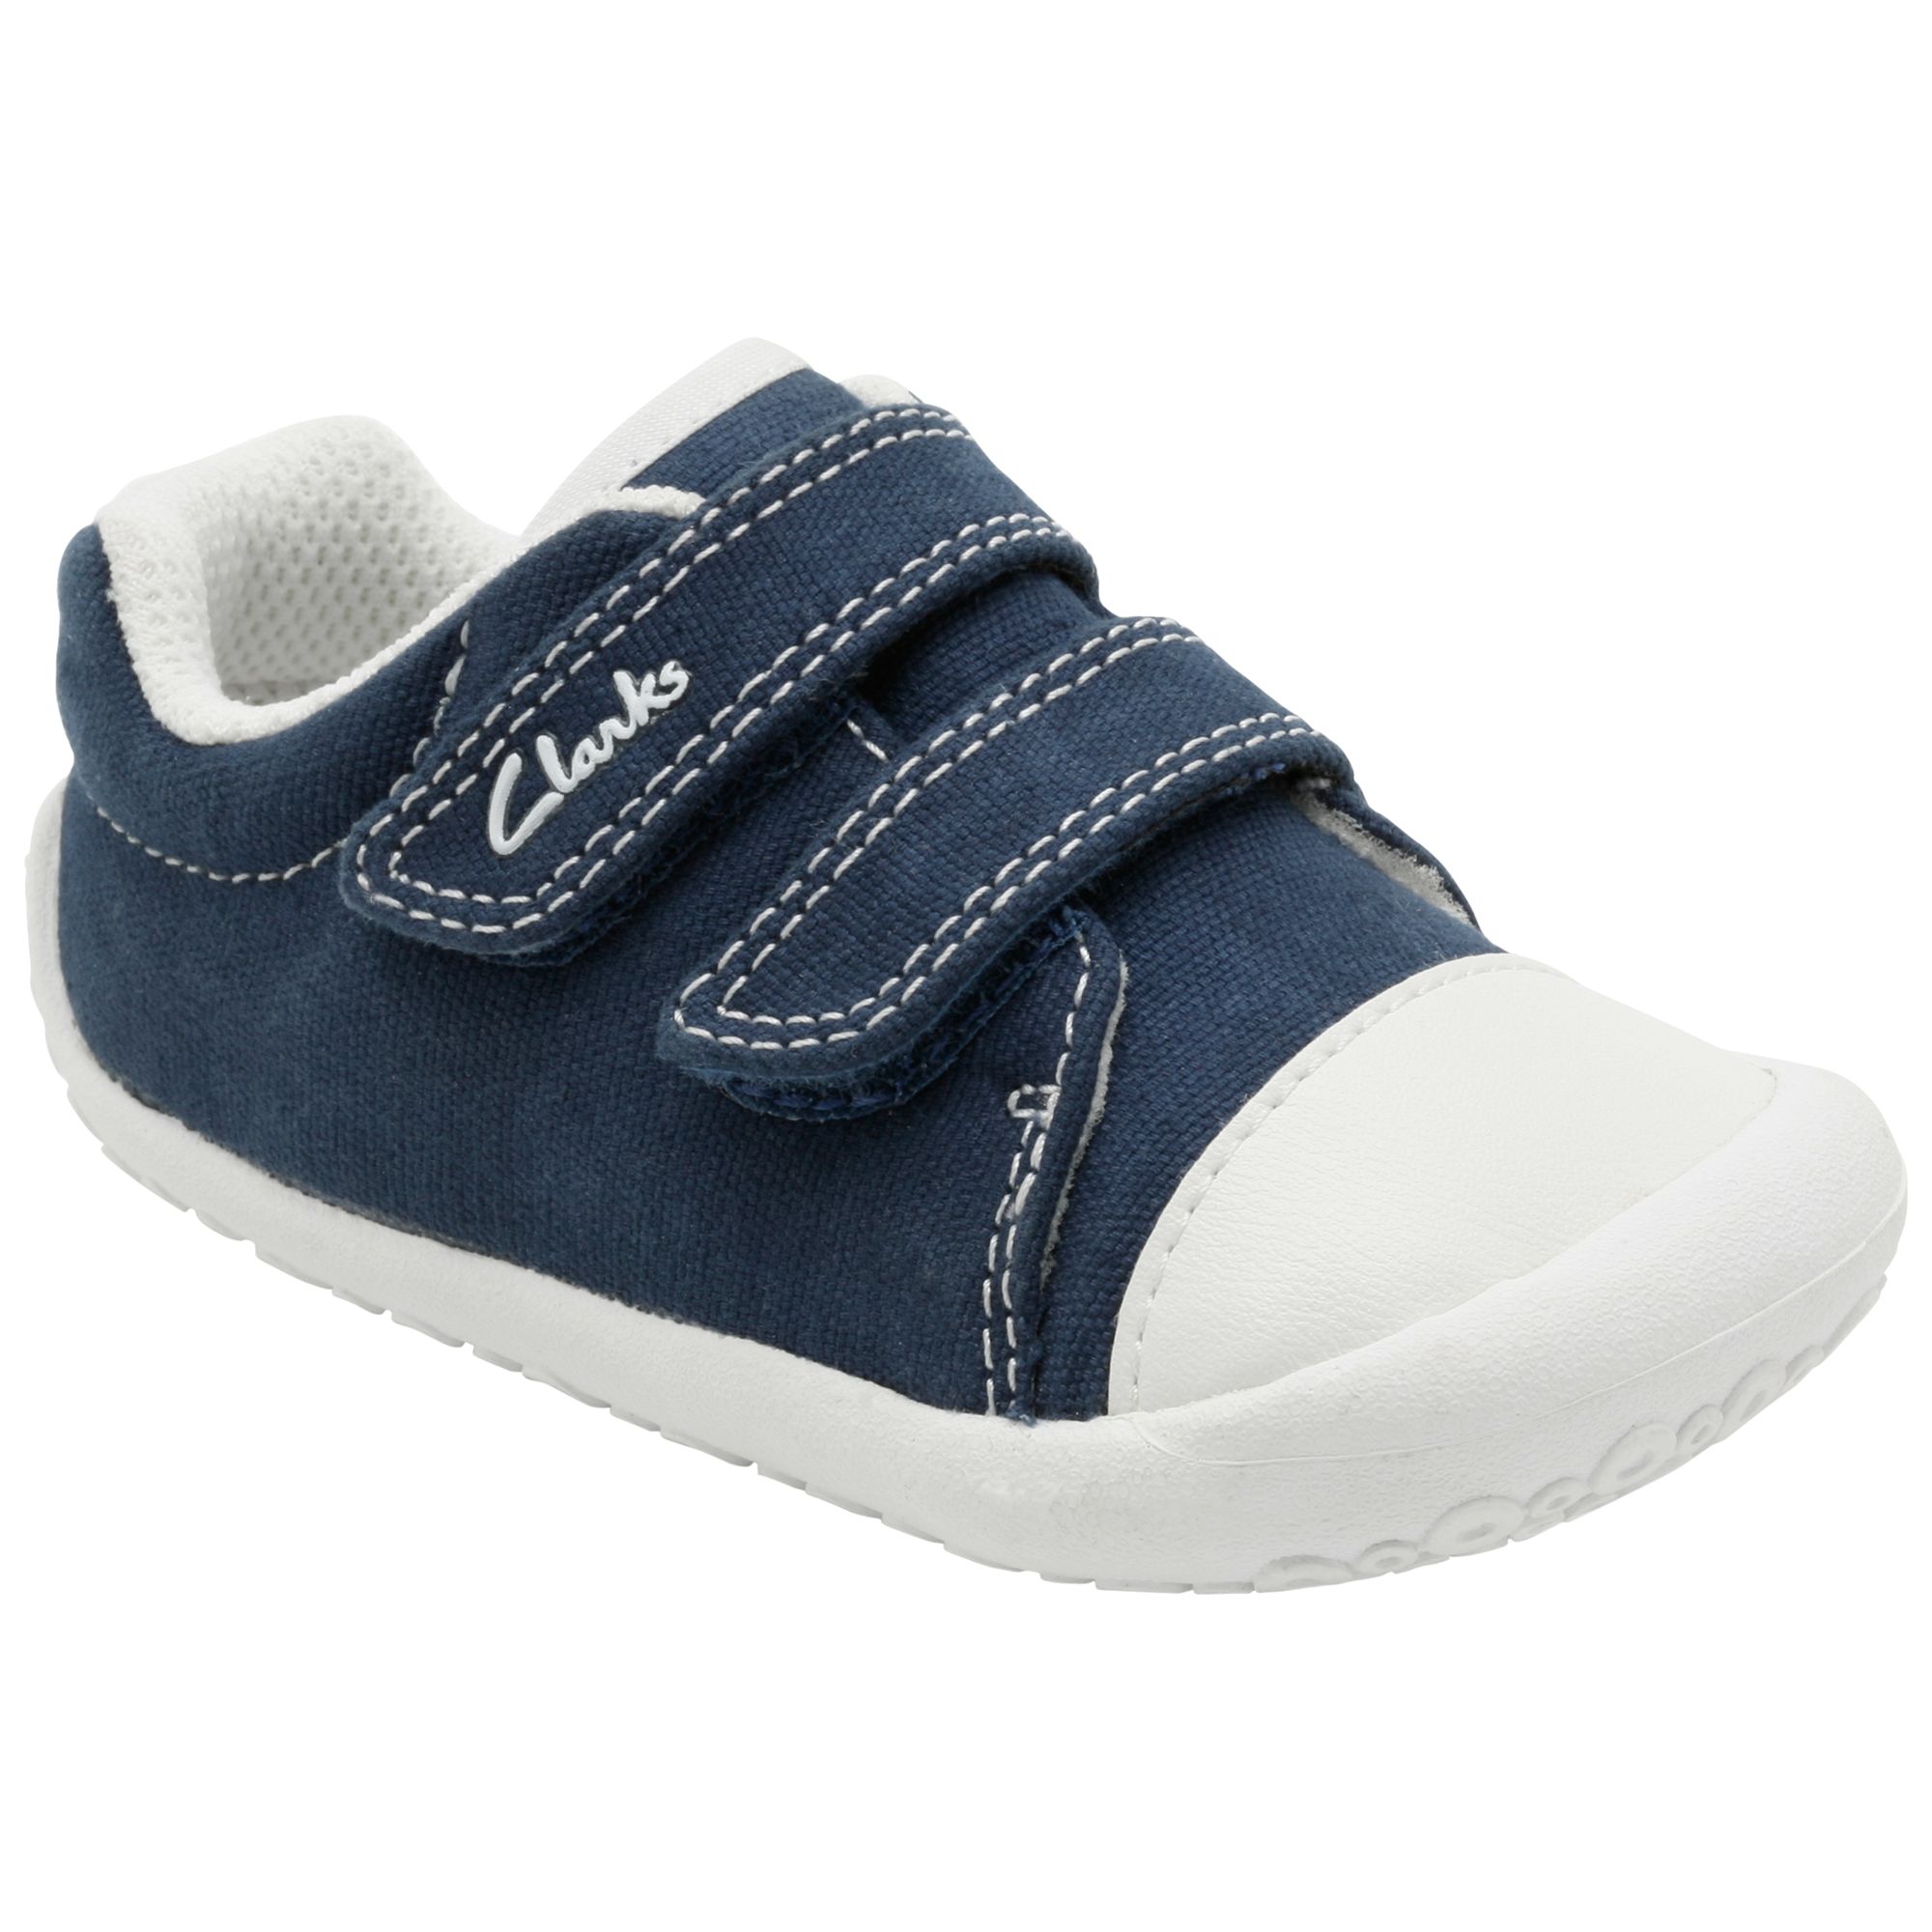 3.5 f baby shoes